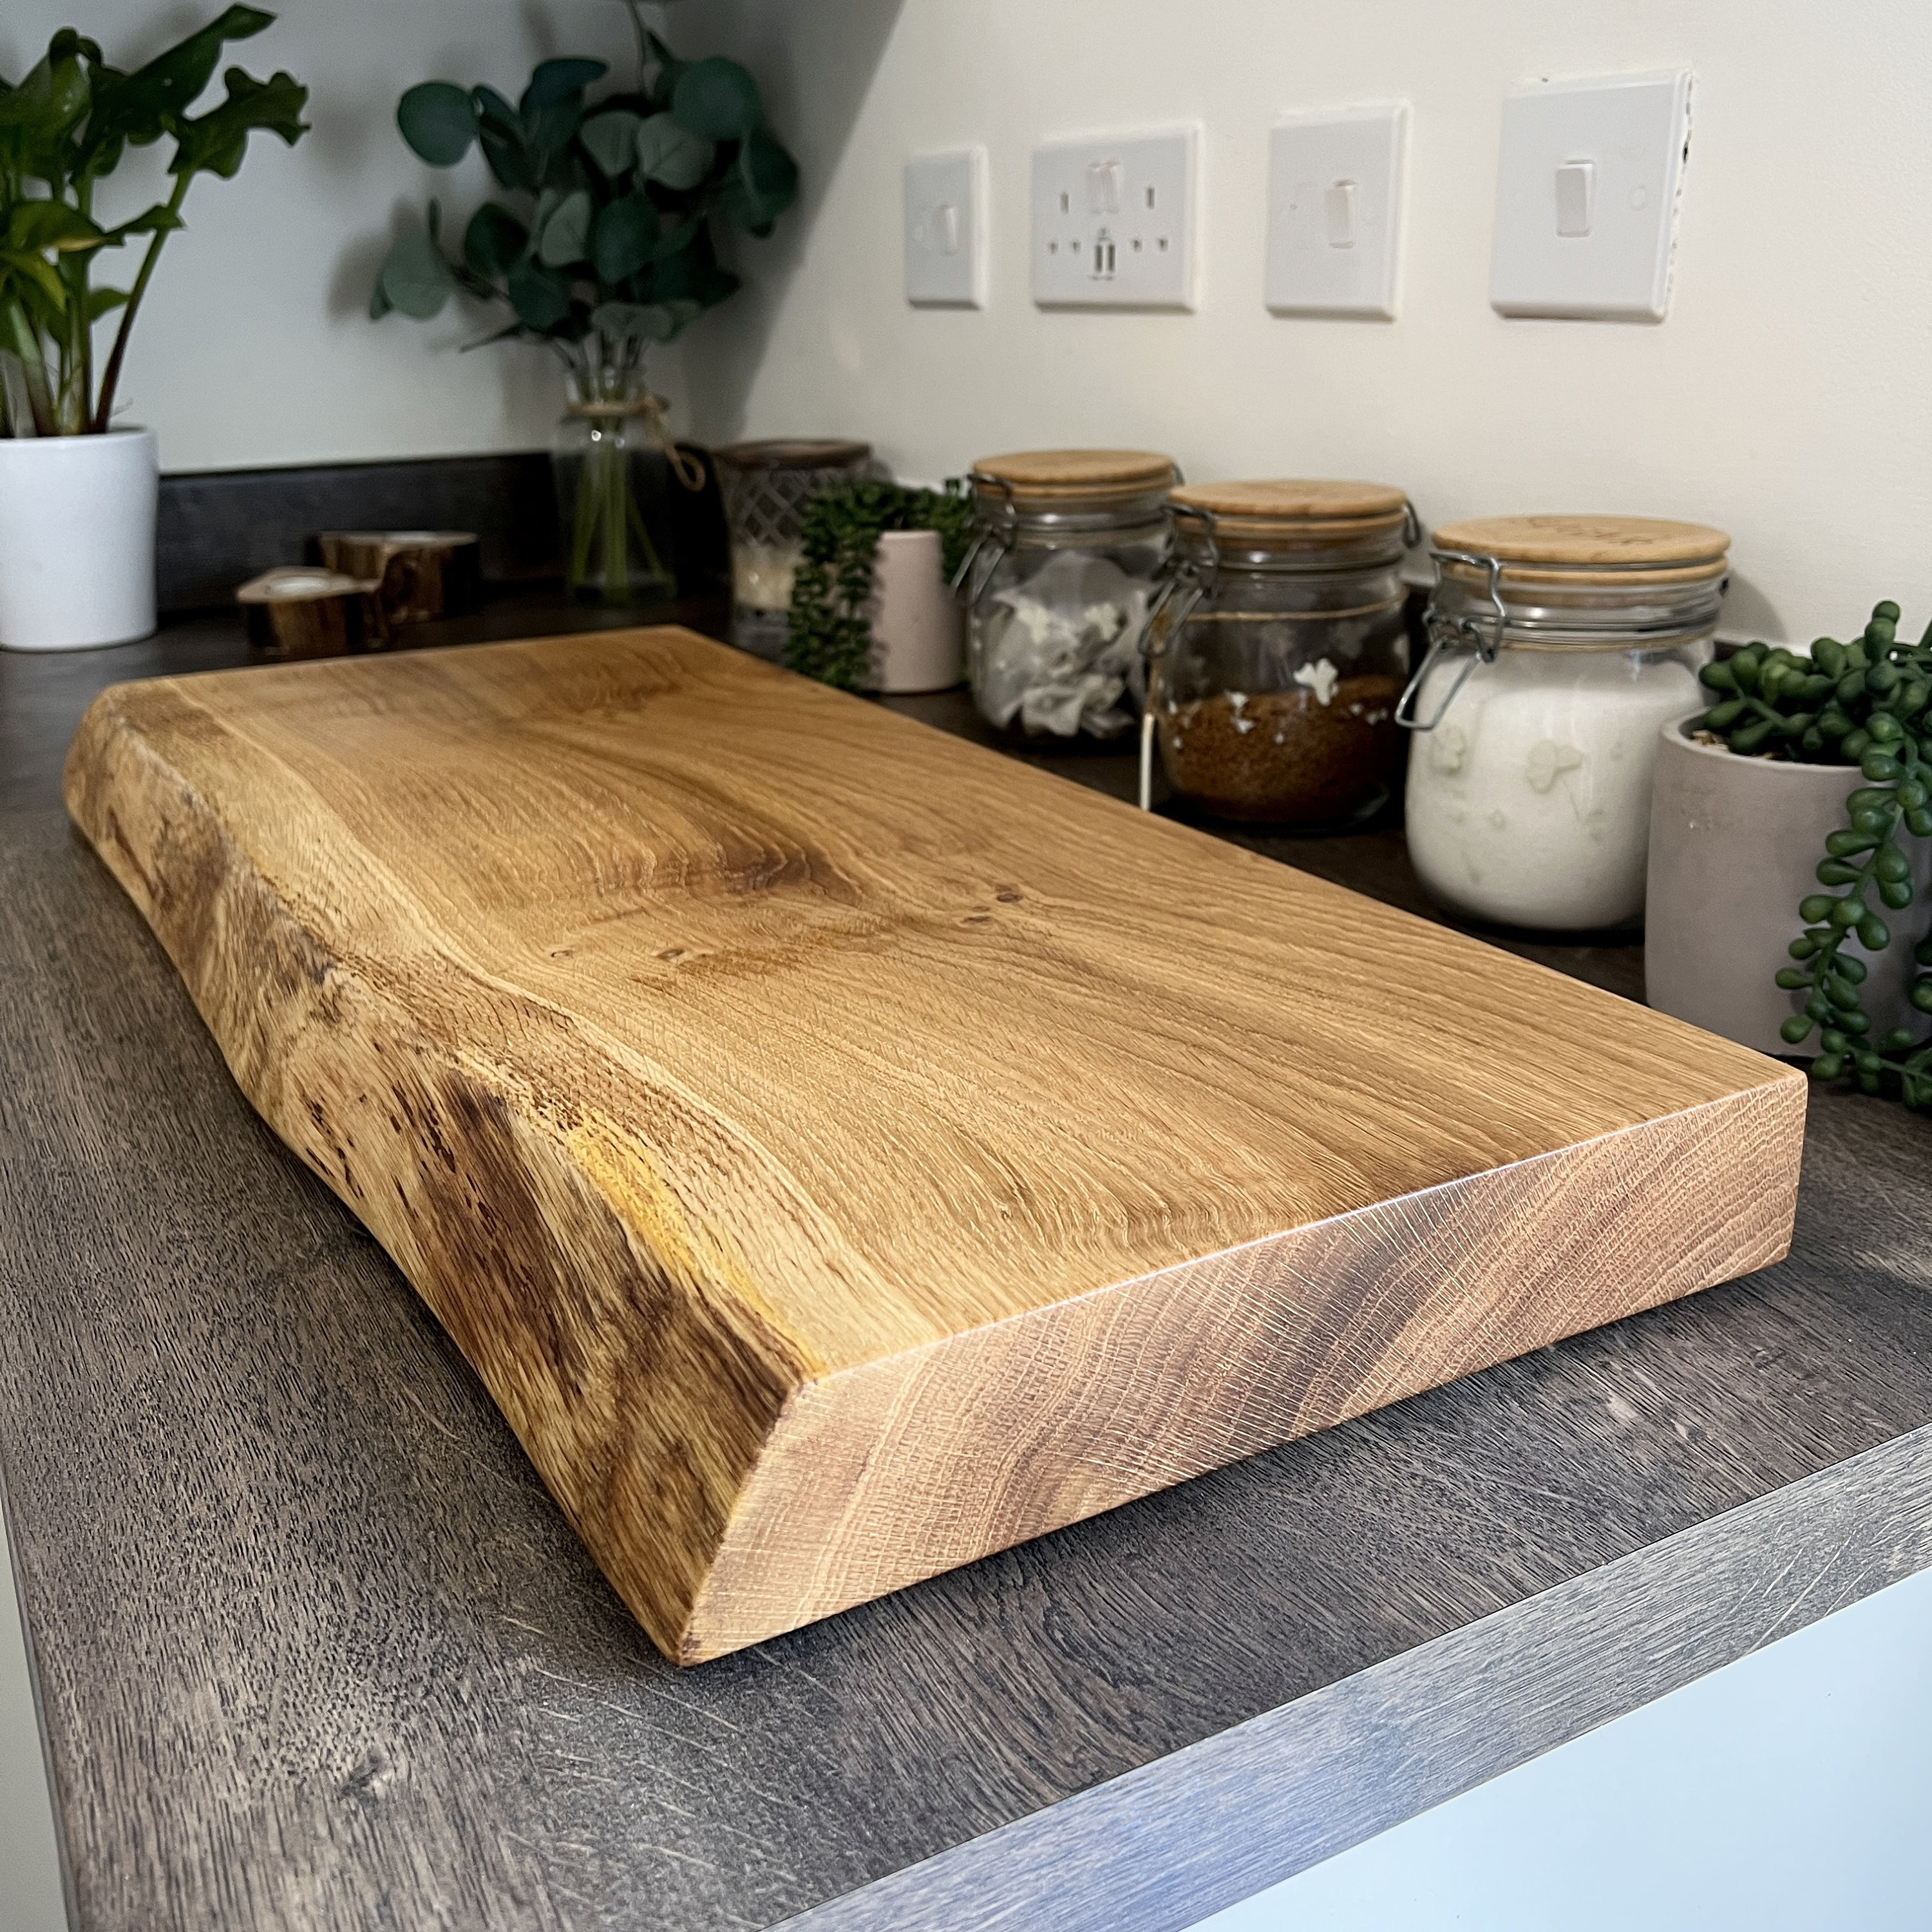 Extra Large Wood Cutting Board With Feet, Pocket Handles and Juice Groove,  24x18x1.25 Inches Thick Cutting Board Handmade in the USA 